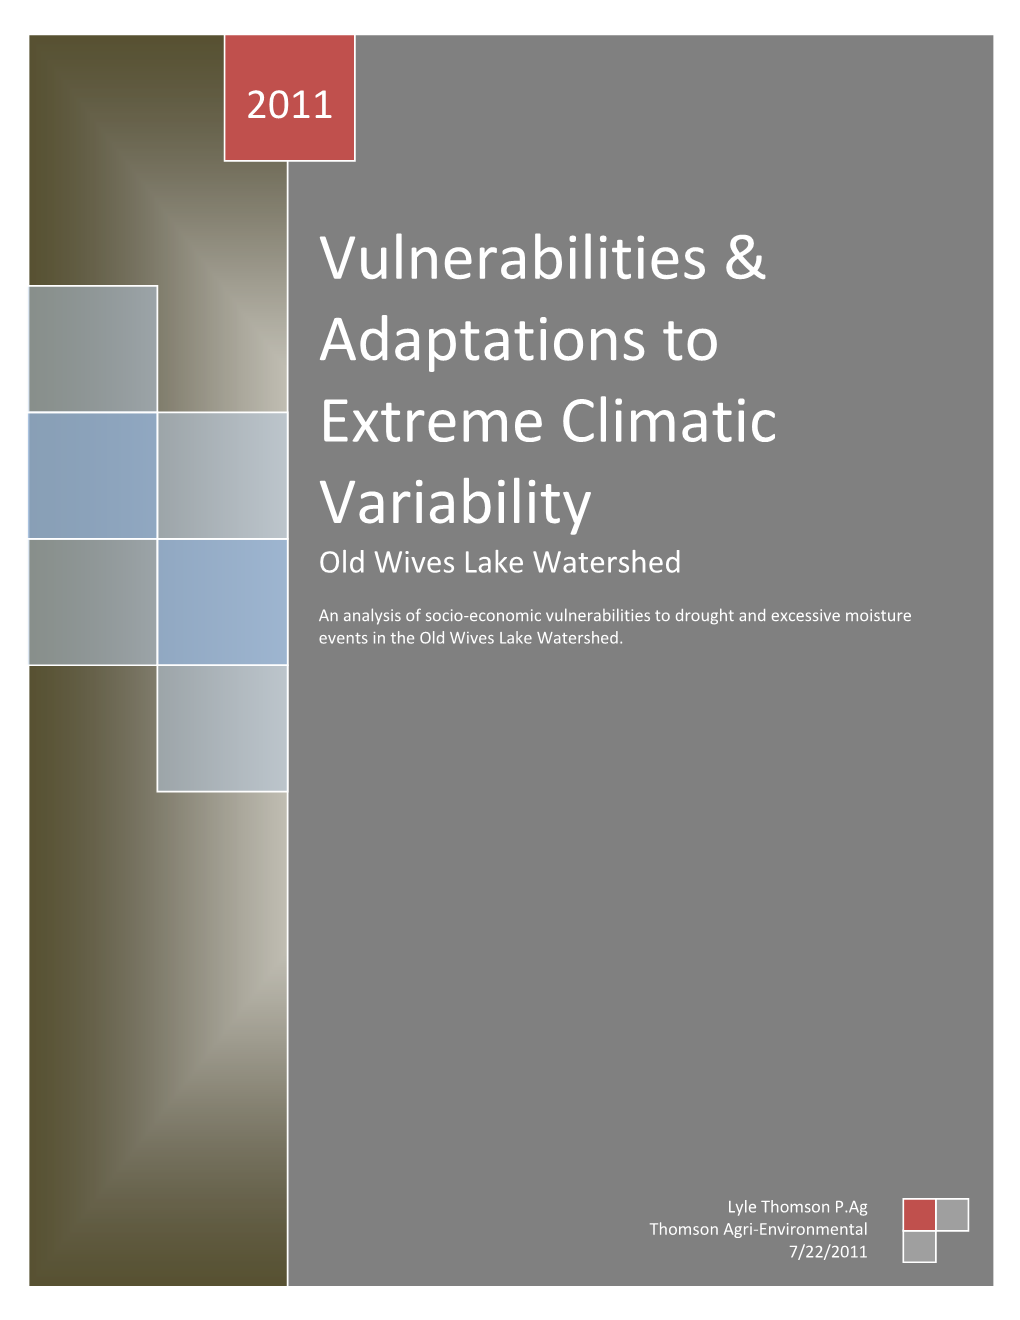 Vulnerabilities & Adaptations to Extreme Climatic Variability